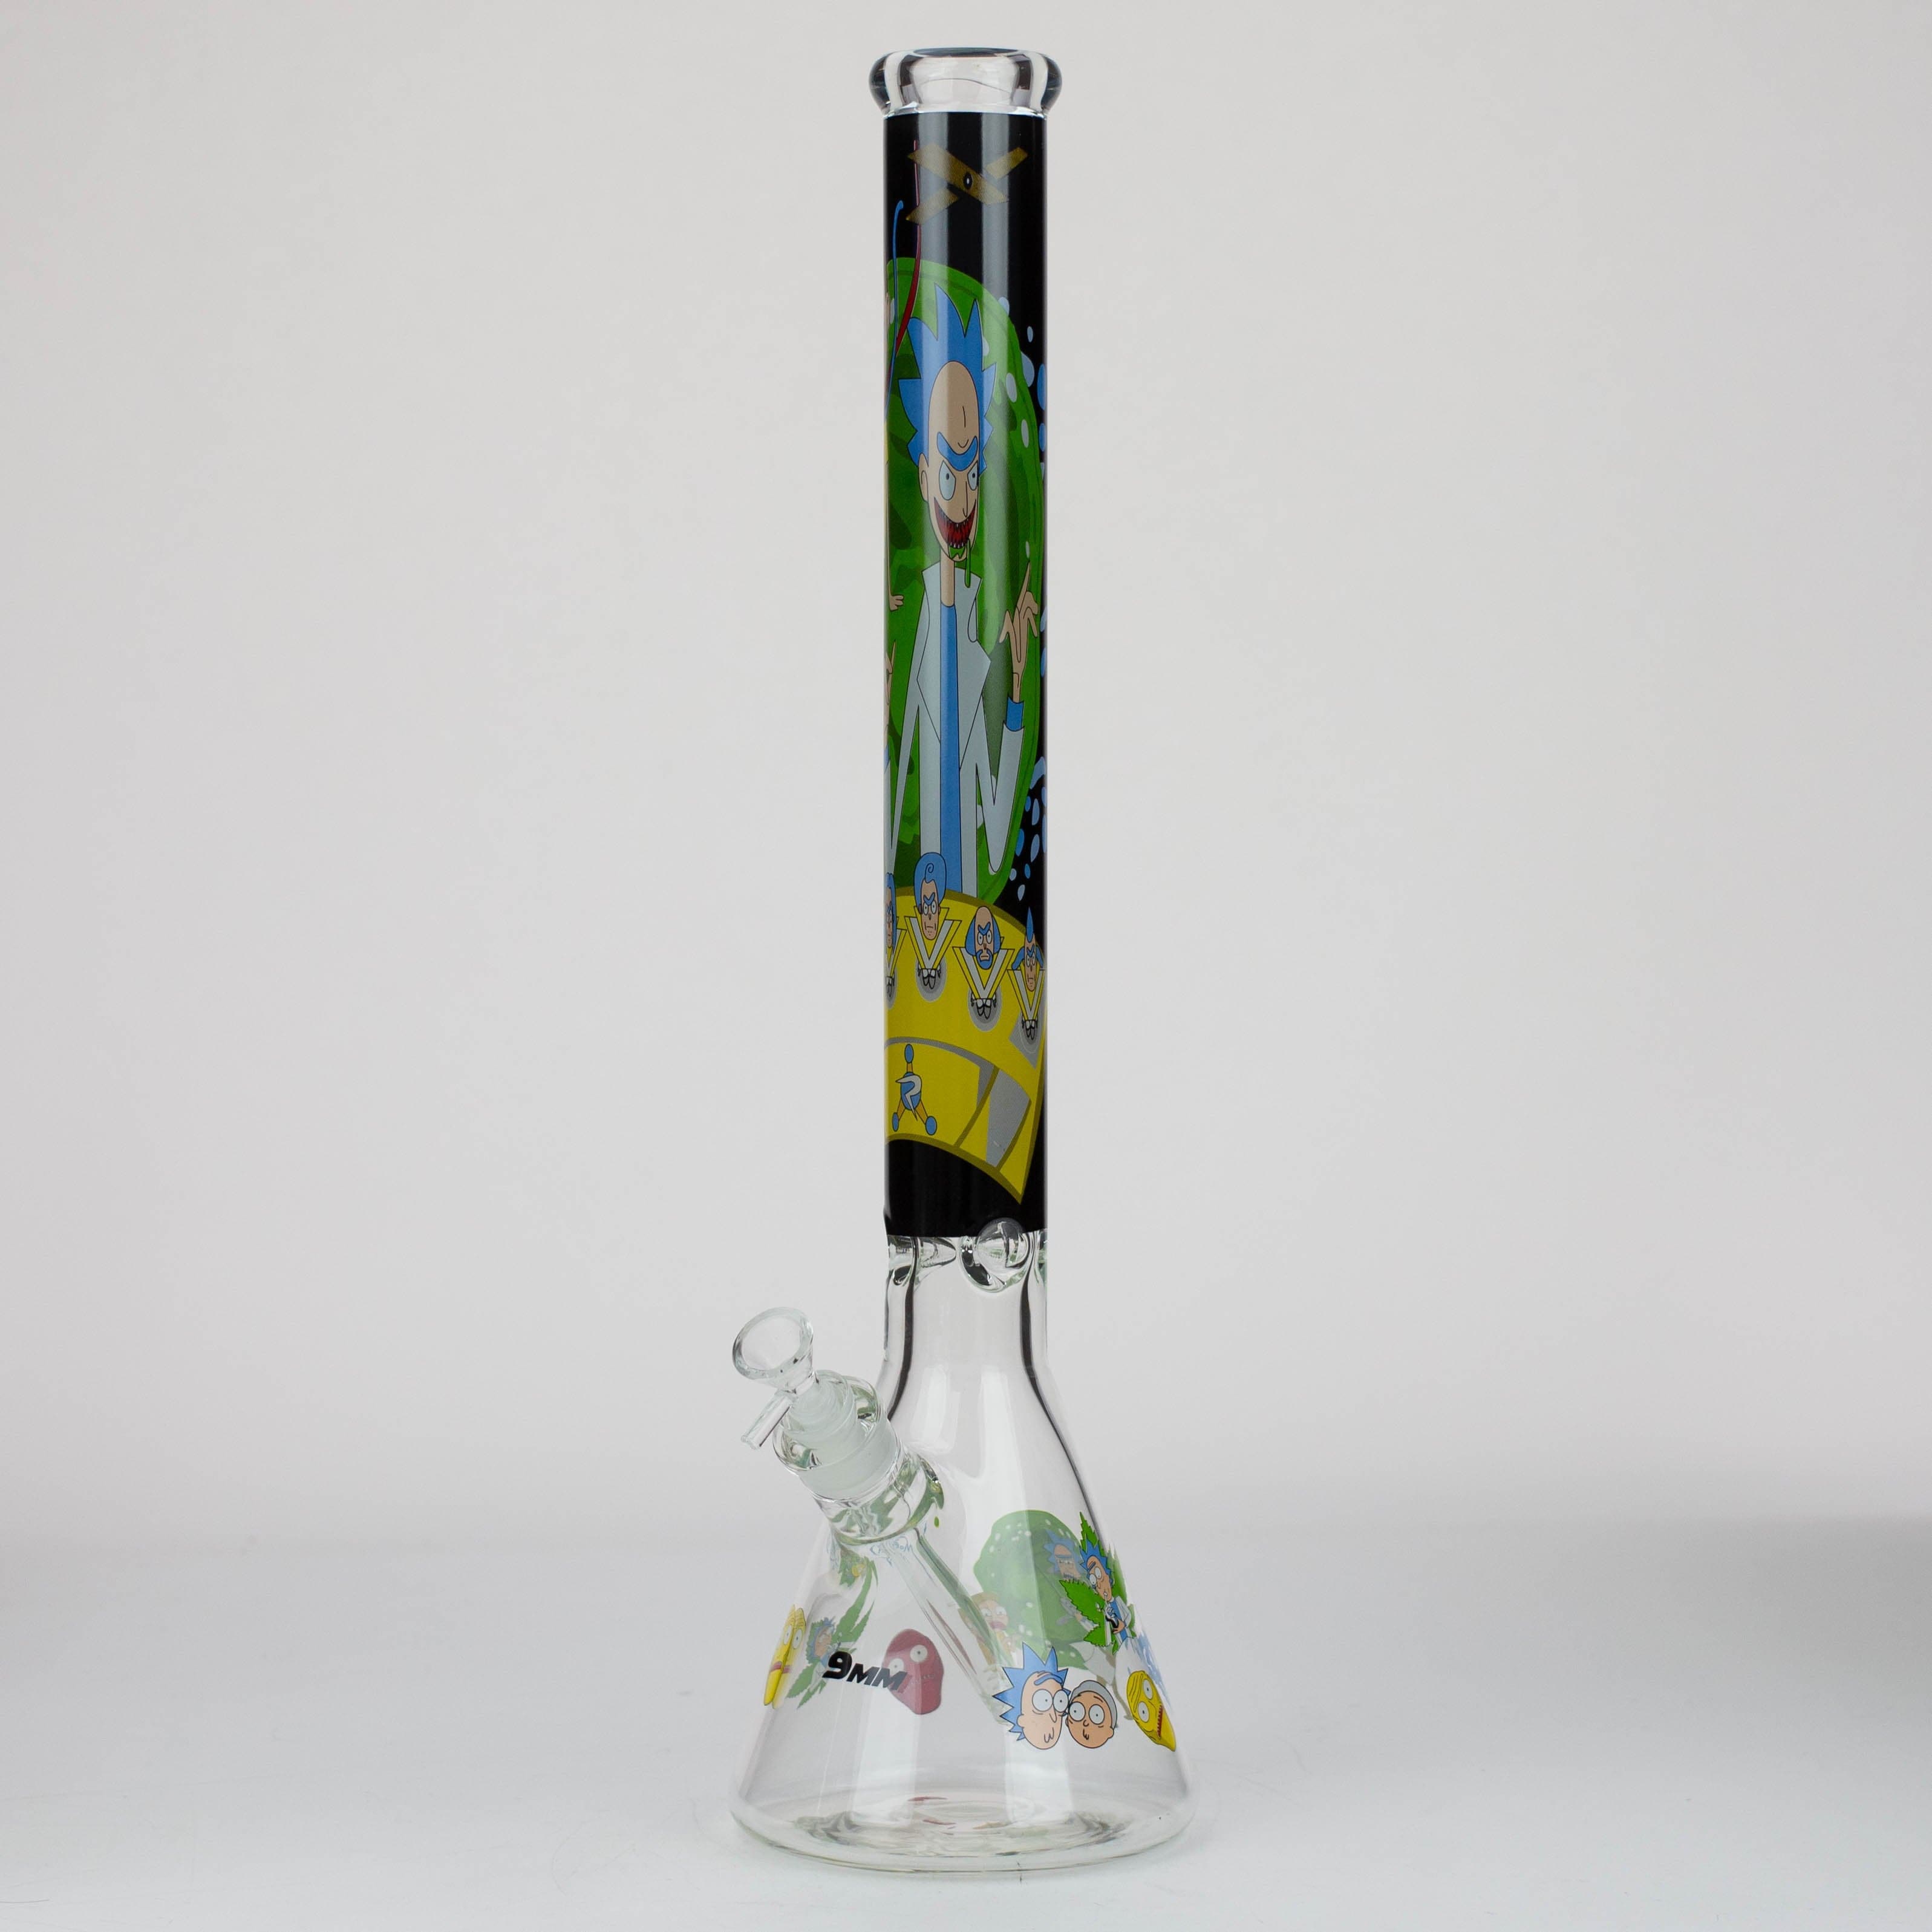 RM Cartoon 9 mm glass water pipes 22"_7